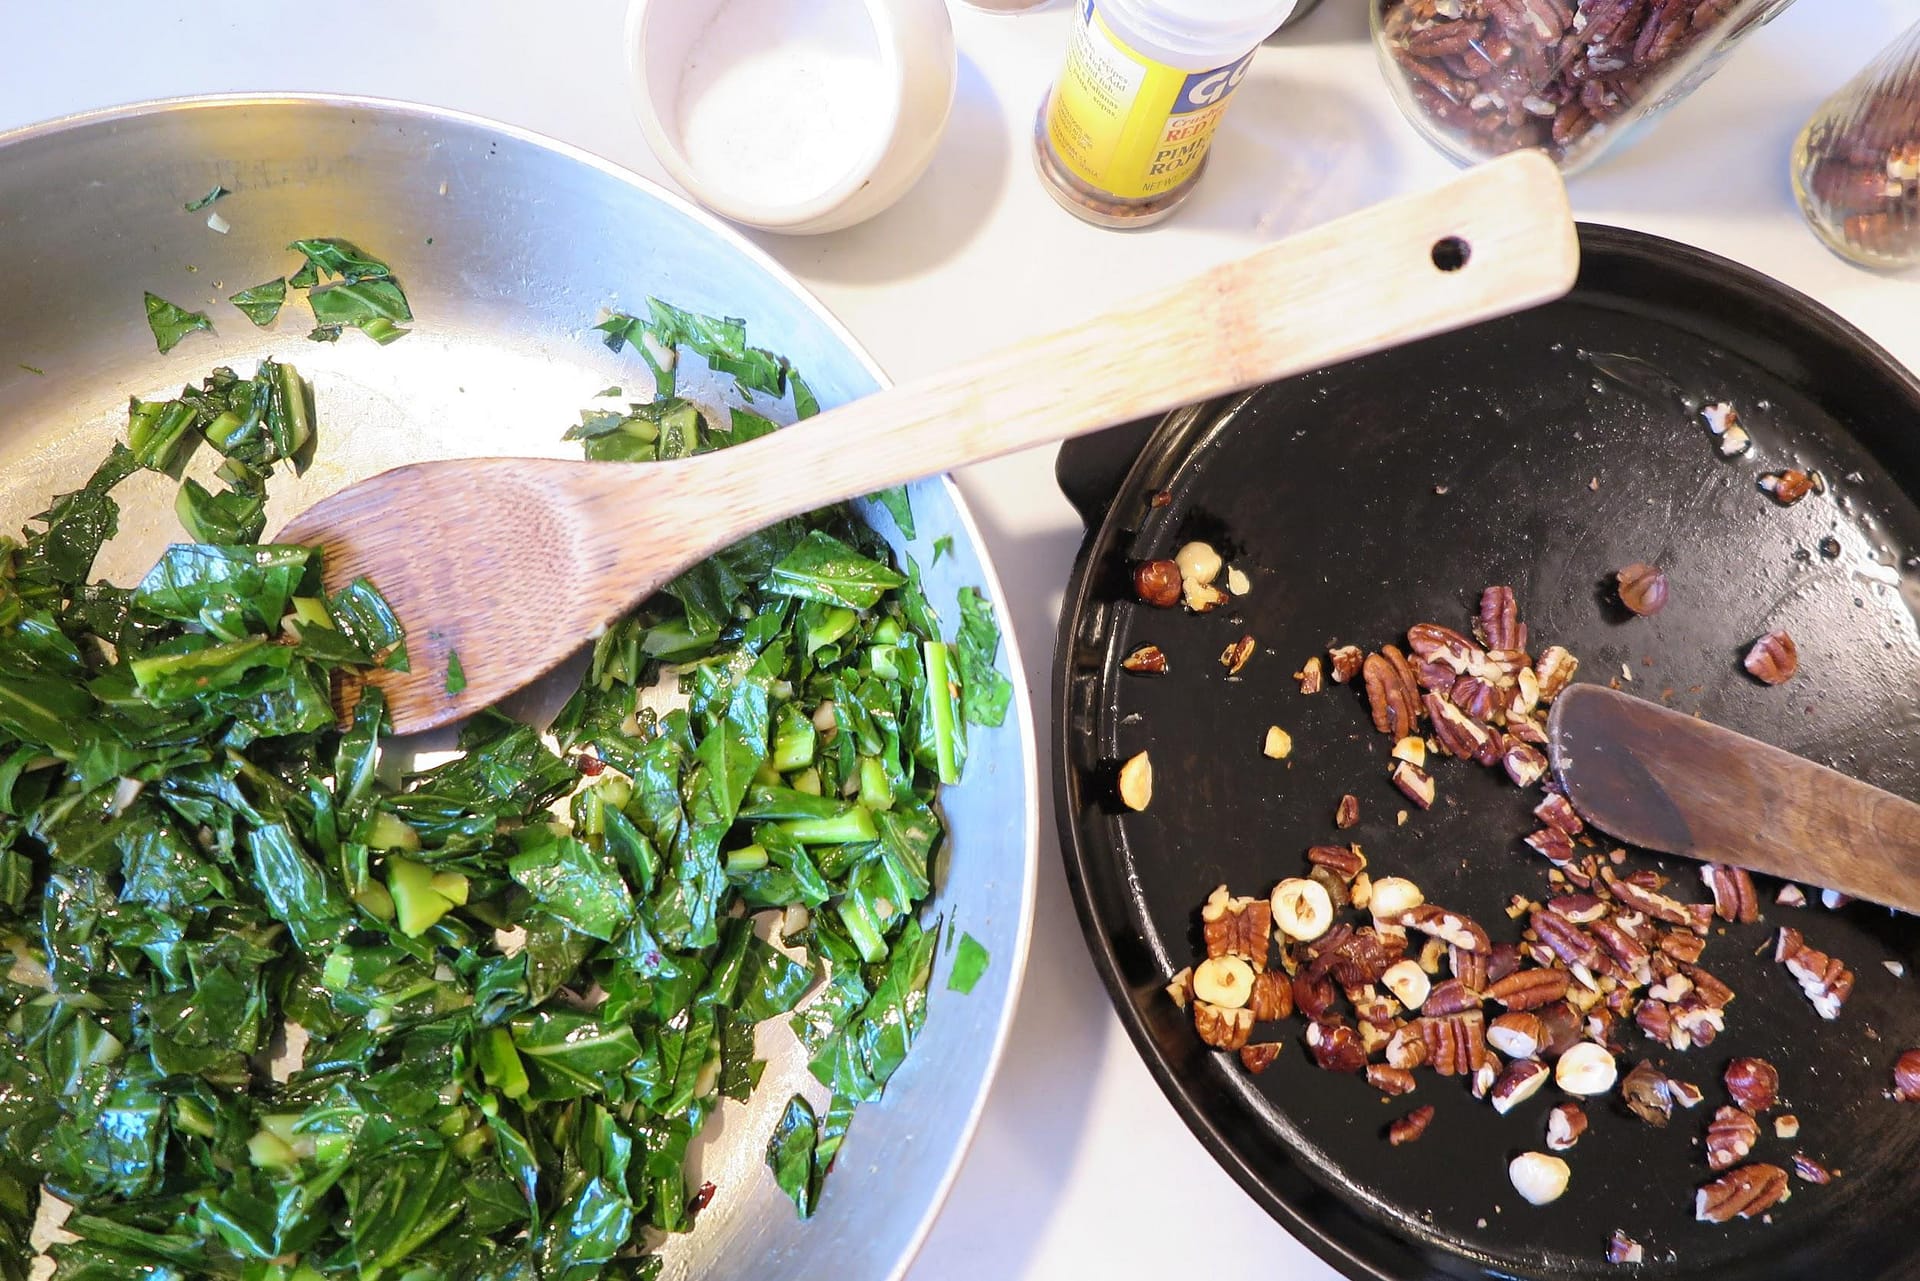 Silver sautee pan with leafy greens and a wooden spoon on the left. On the right, a cast iron pan with toasted chopped nuts.